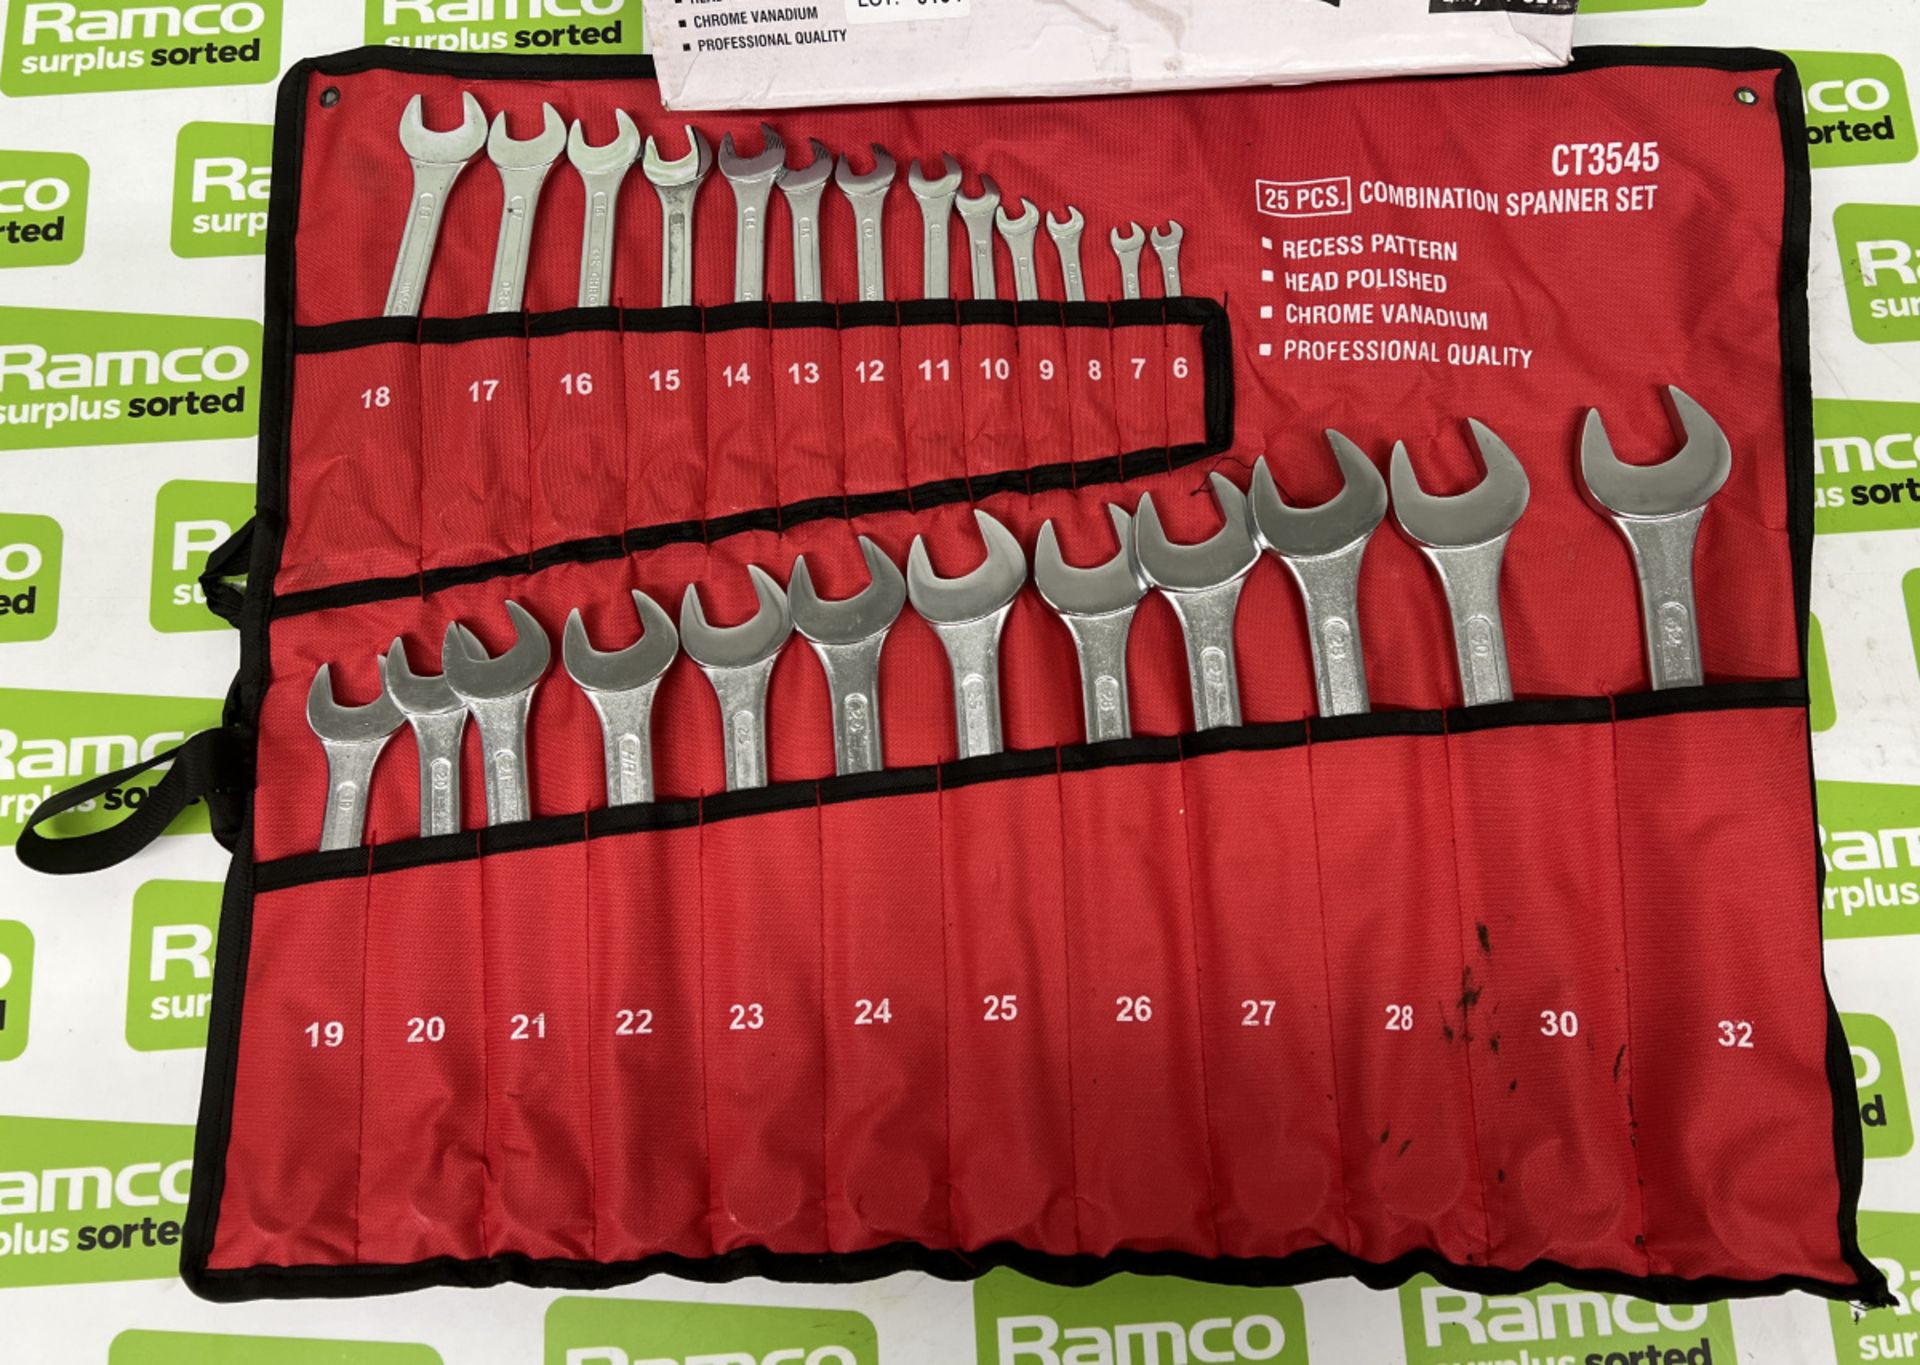 CT3545 25 piece combination spanner set - sizes 19-32mm - Image 2 of 3